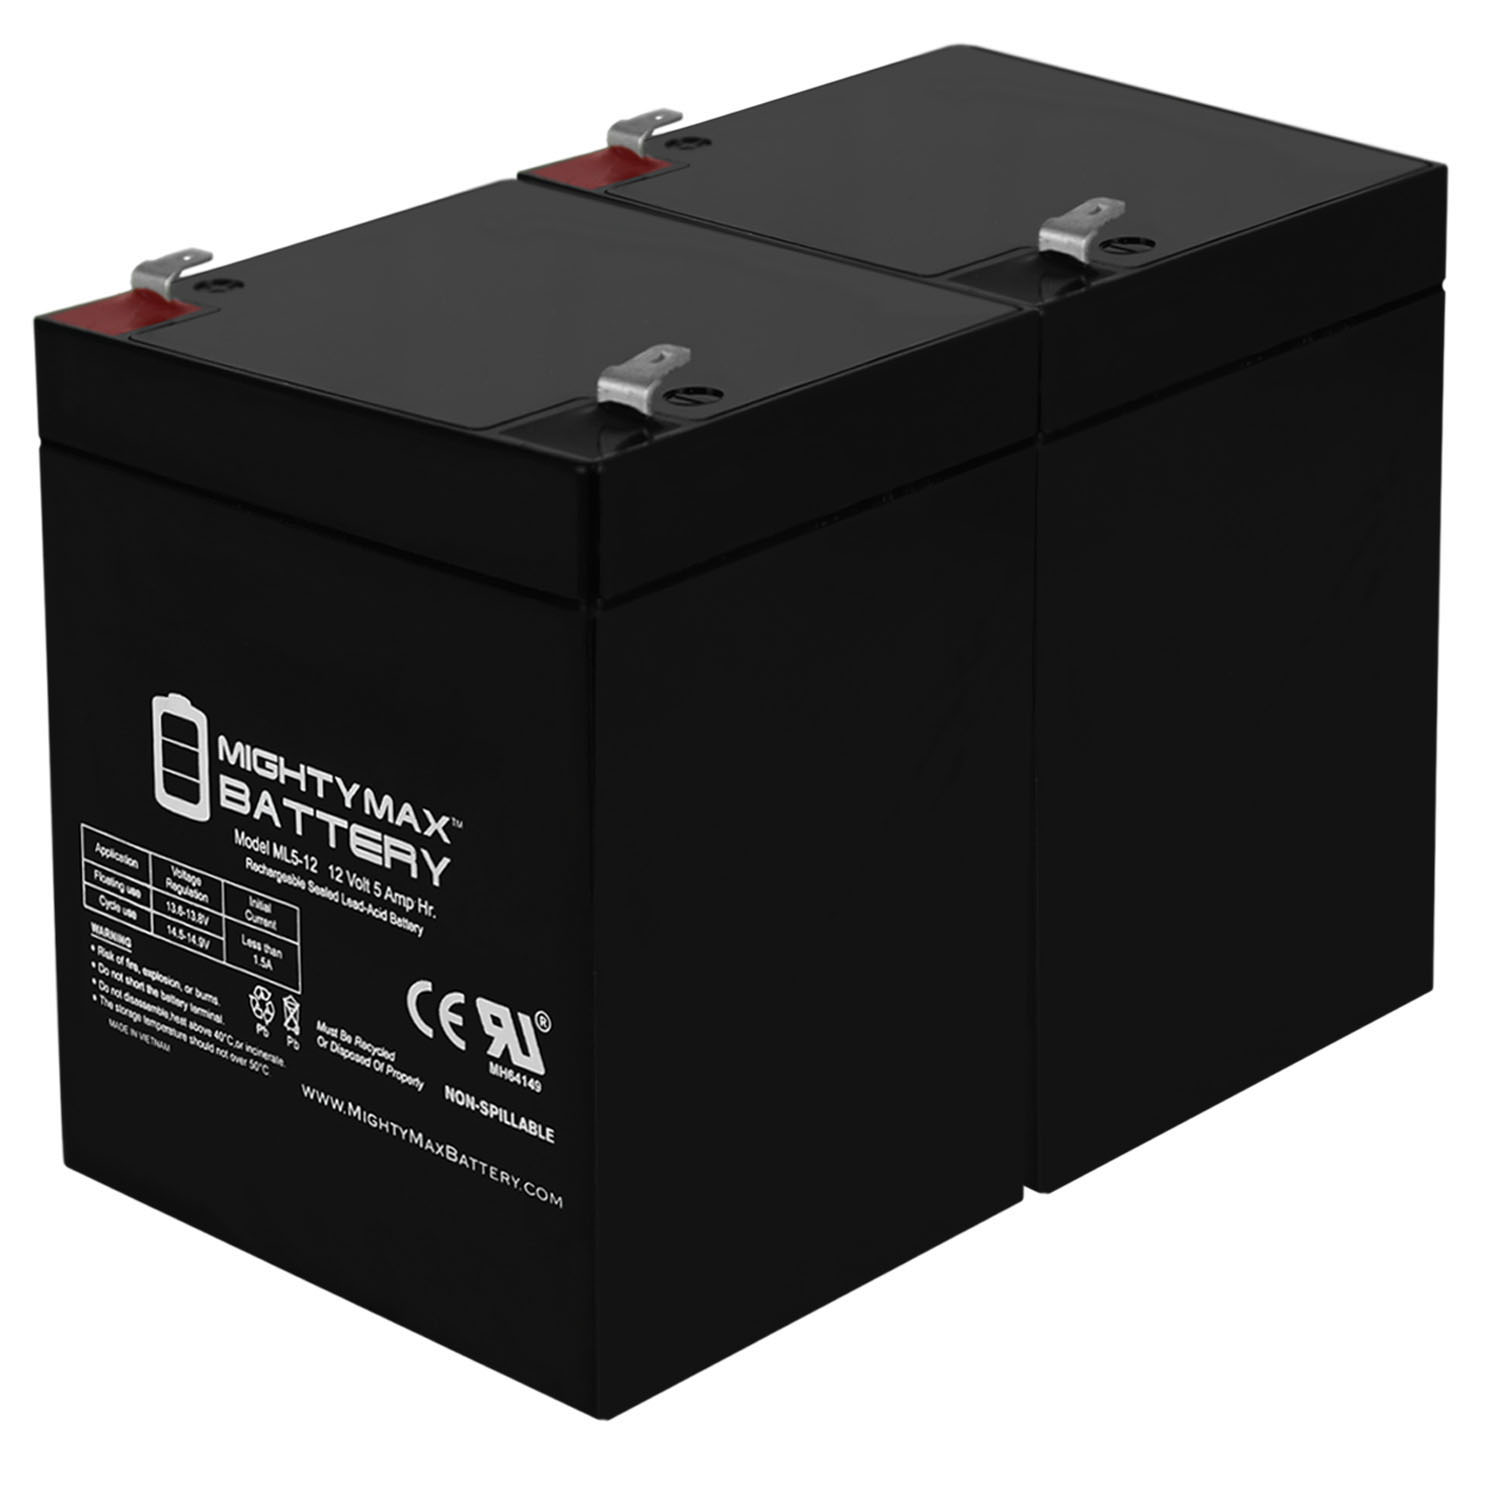 12V 5AH SLA Replacement Battery for Neata NT12-5A - 2 Pack